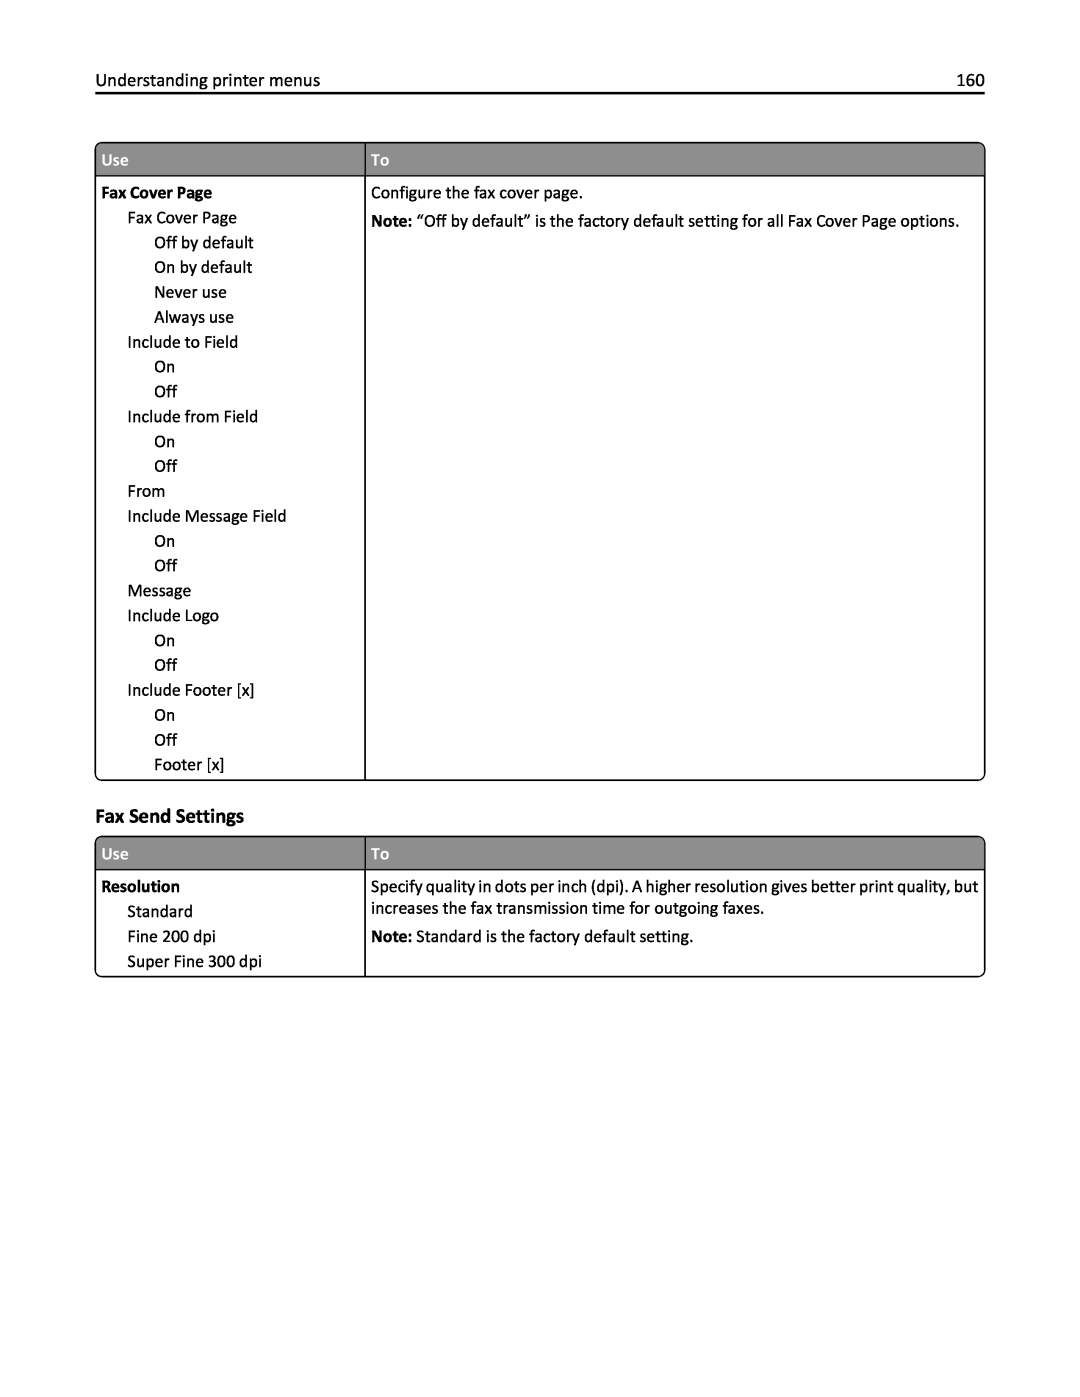 Lexmark 436 manual Fax Send Settings, Fax Cover Page, Resolution 